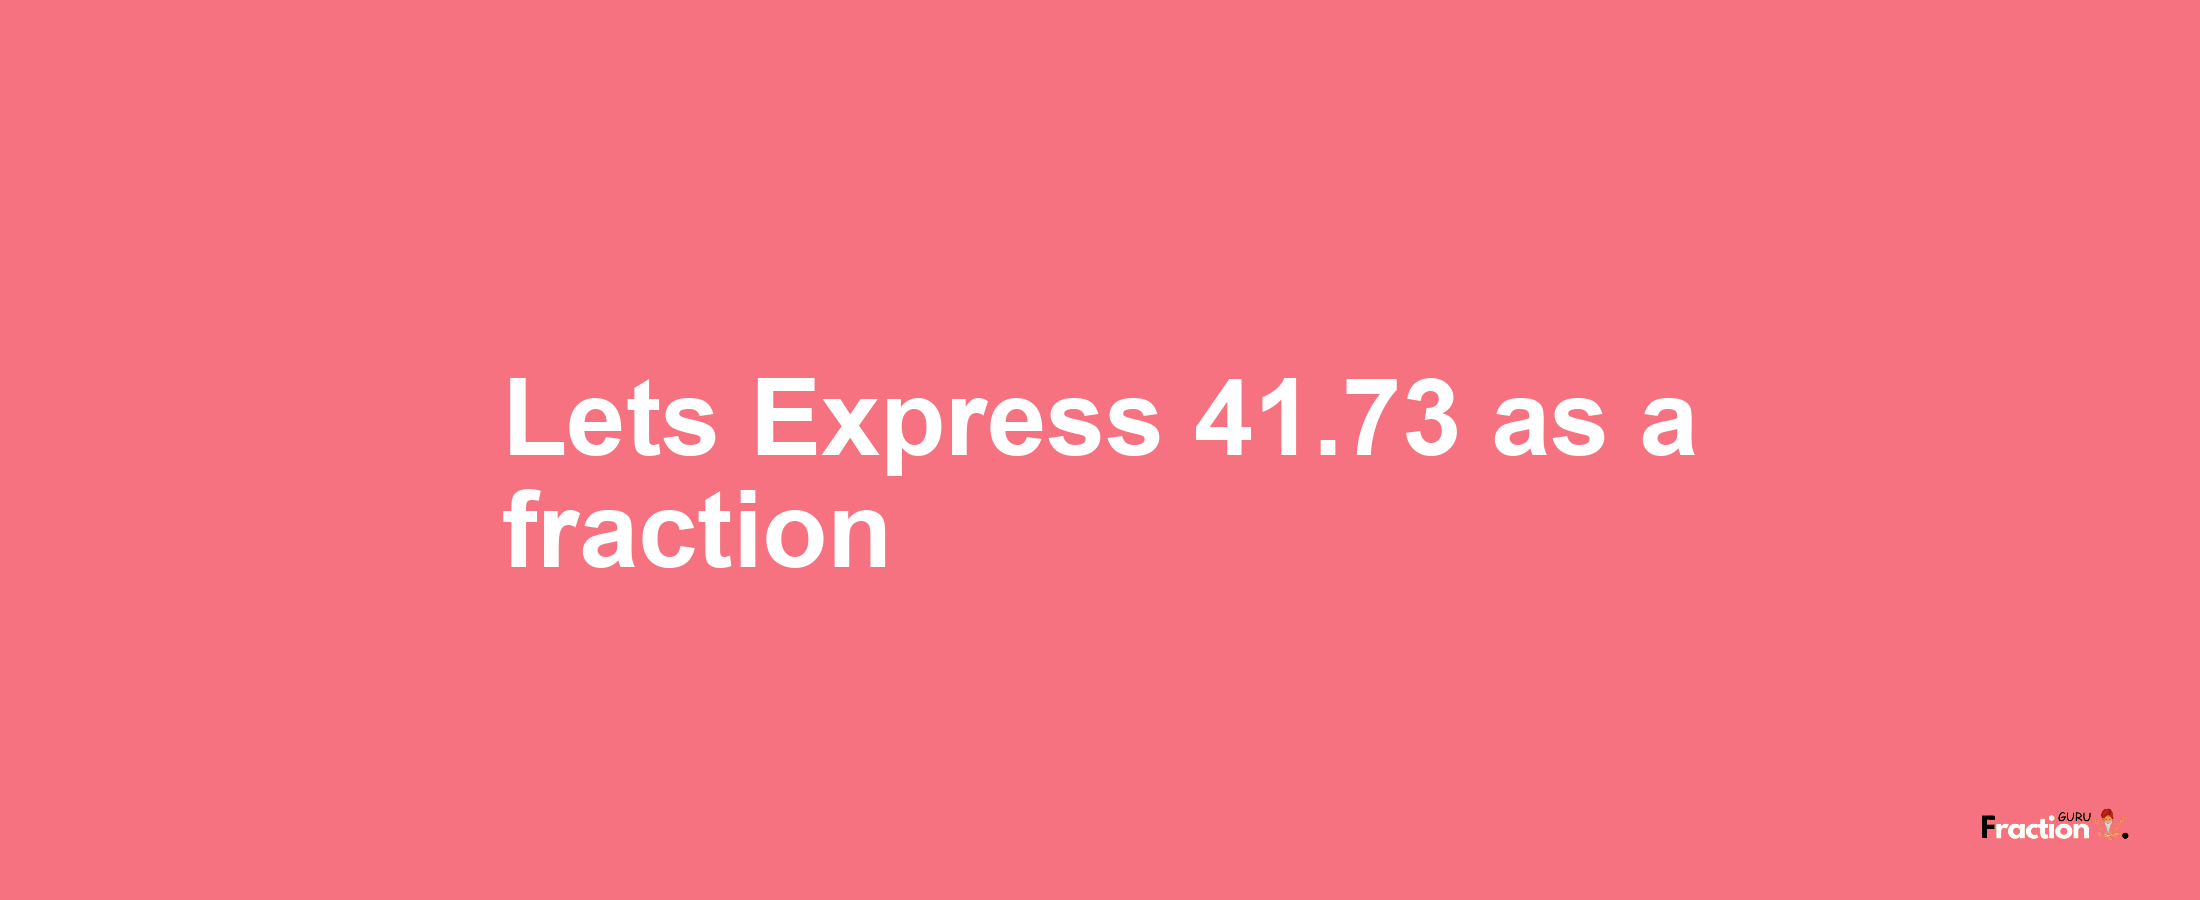 Lets Express 41.73 as afraction